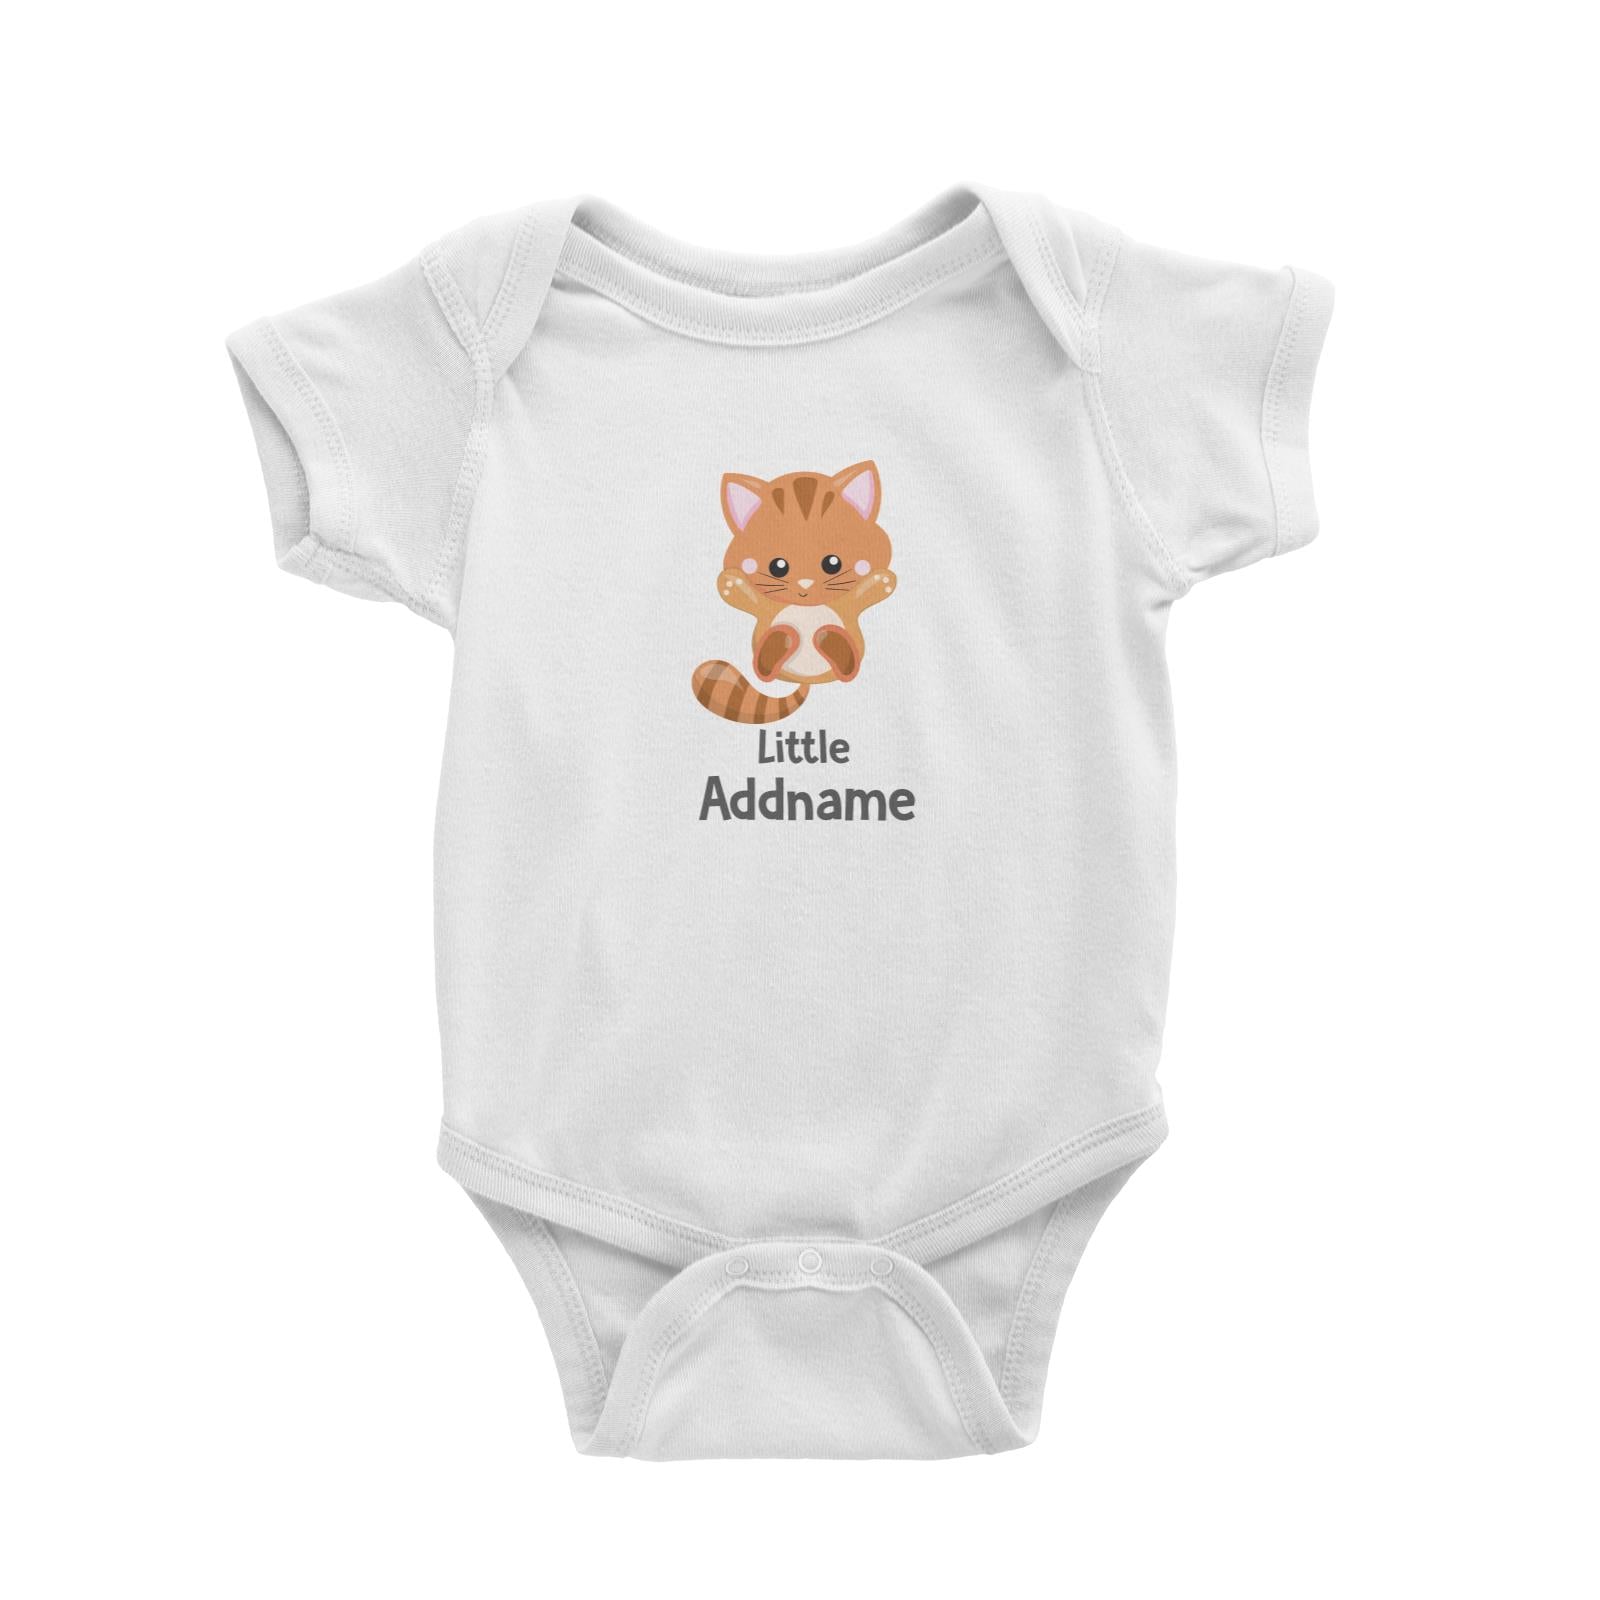 Adorable Cats Orange Cat Little Addname White Baby Romper